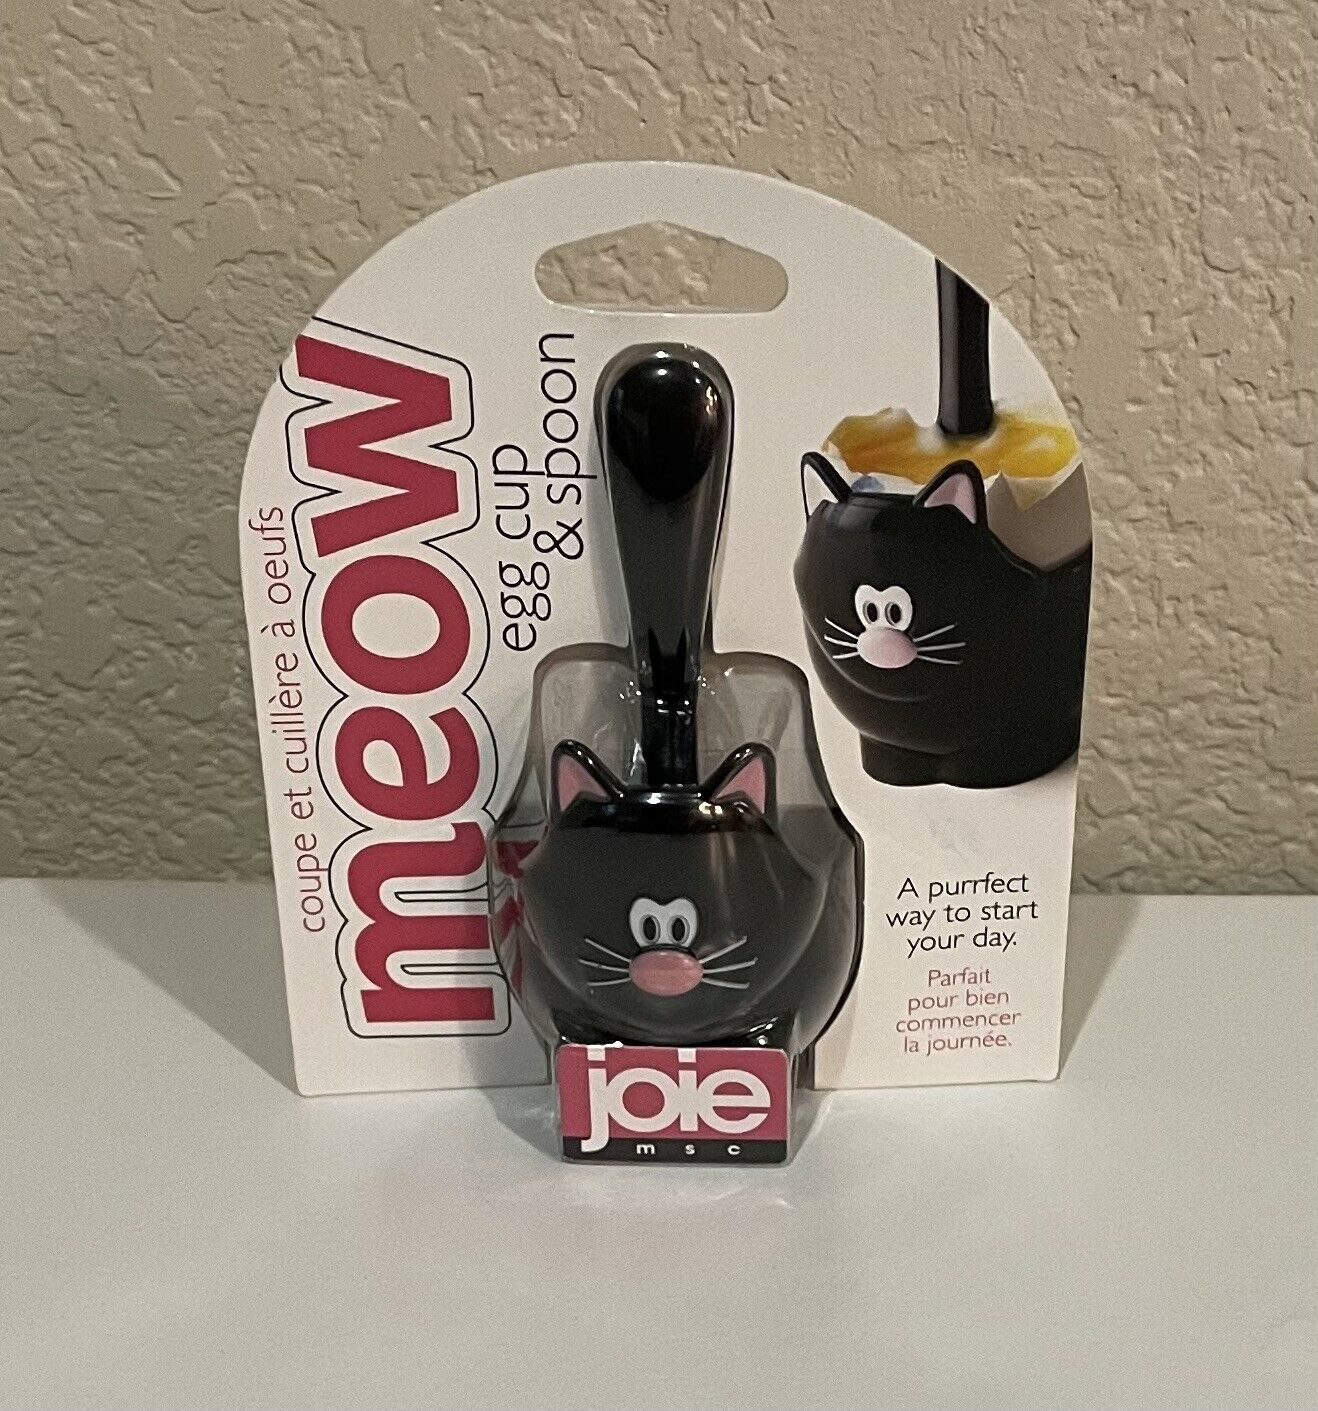 Joie Msc Meow Cat Egg Cup & Spoon New Hard Plastic Black Pink